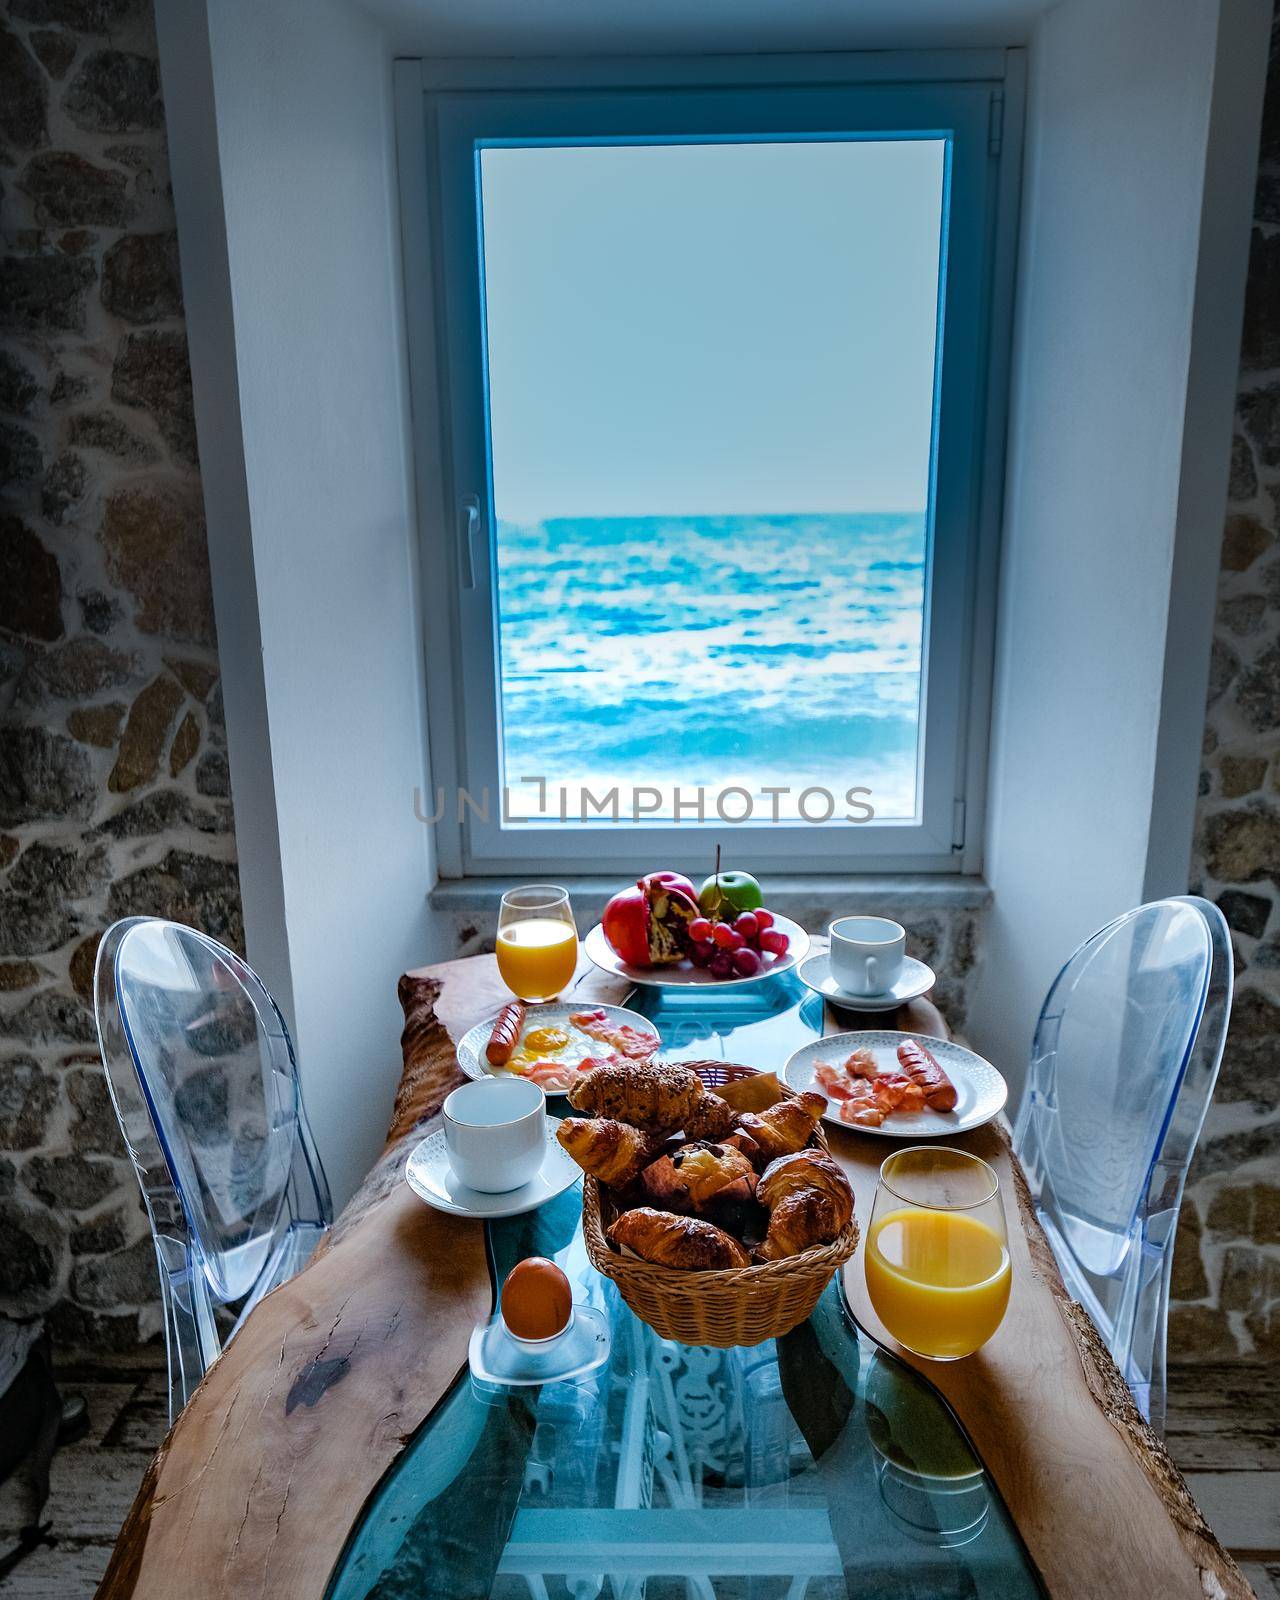 breakfast with a view over the ocean from the window, Cefalu, medieval village of Sicily island, Province of Palermo, Italy by fokkebok